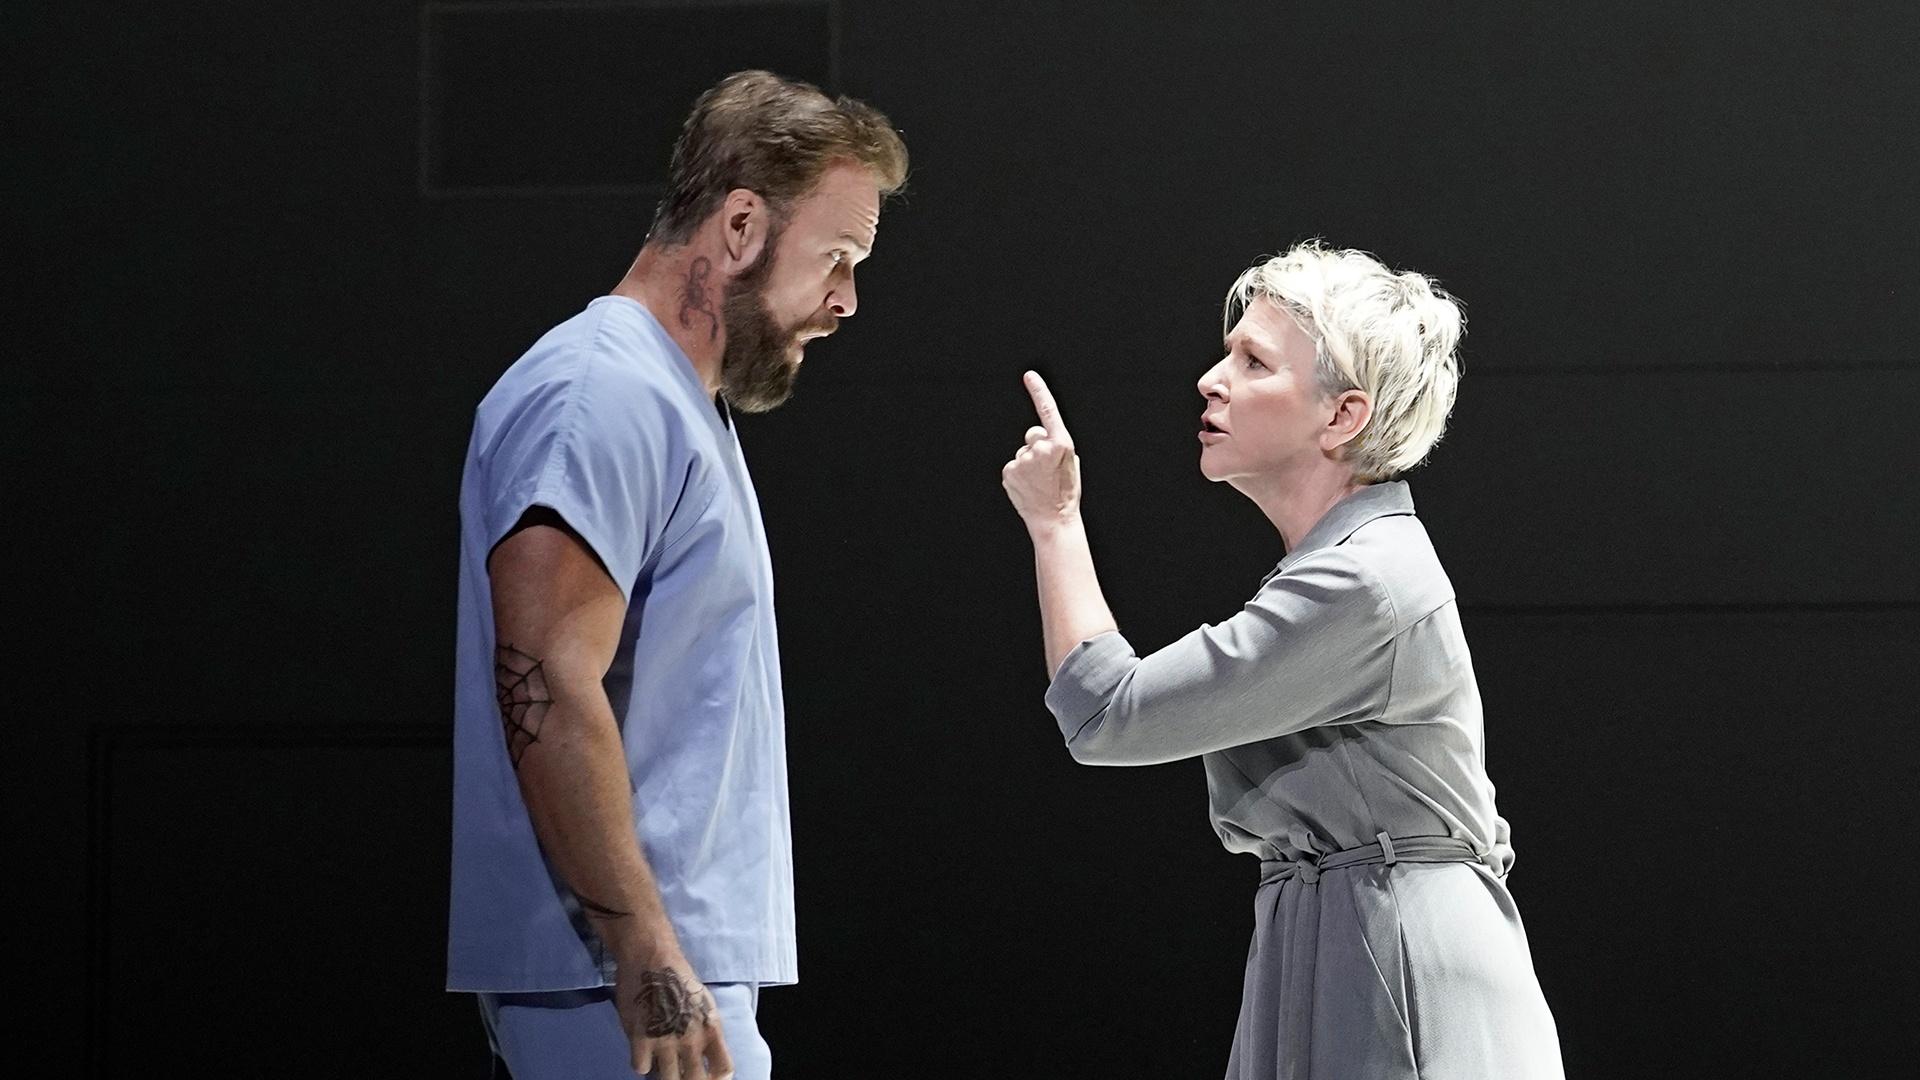 A white man with brown short hair, beard and mustache wearing prison scubs stands before a white woman with short blonde hair wearing a gray dress. She is pointed her finger at him.